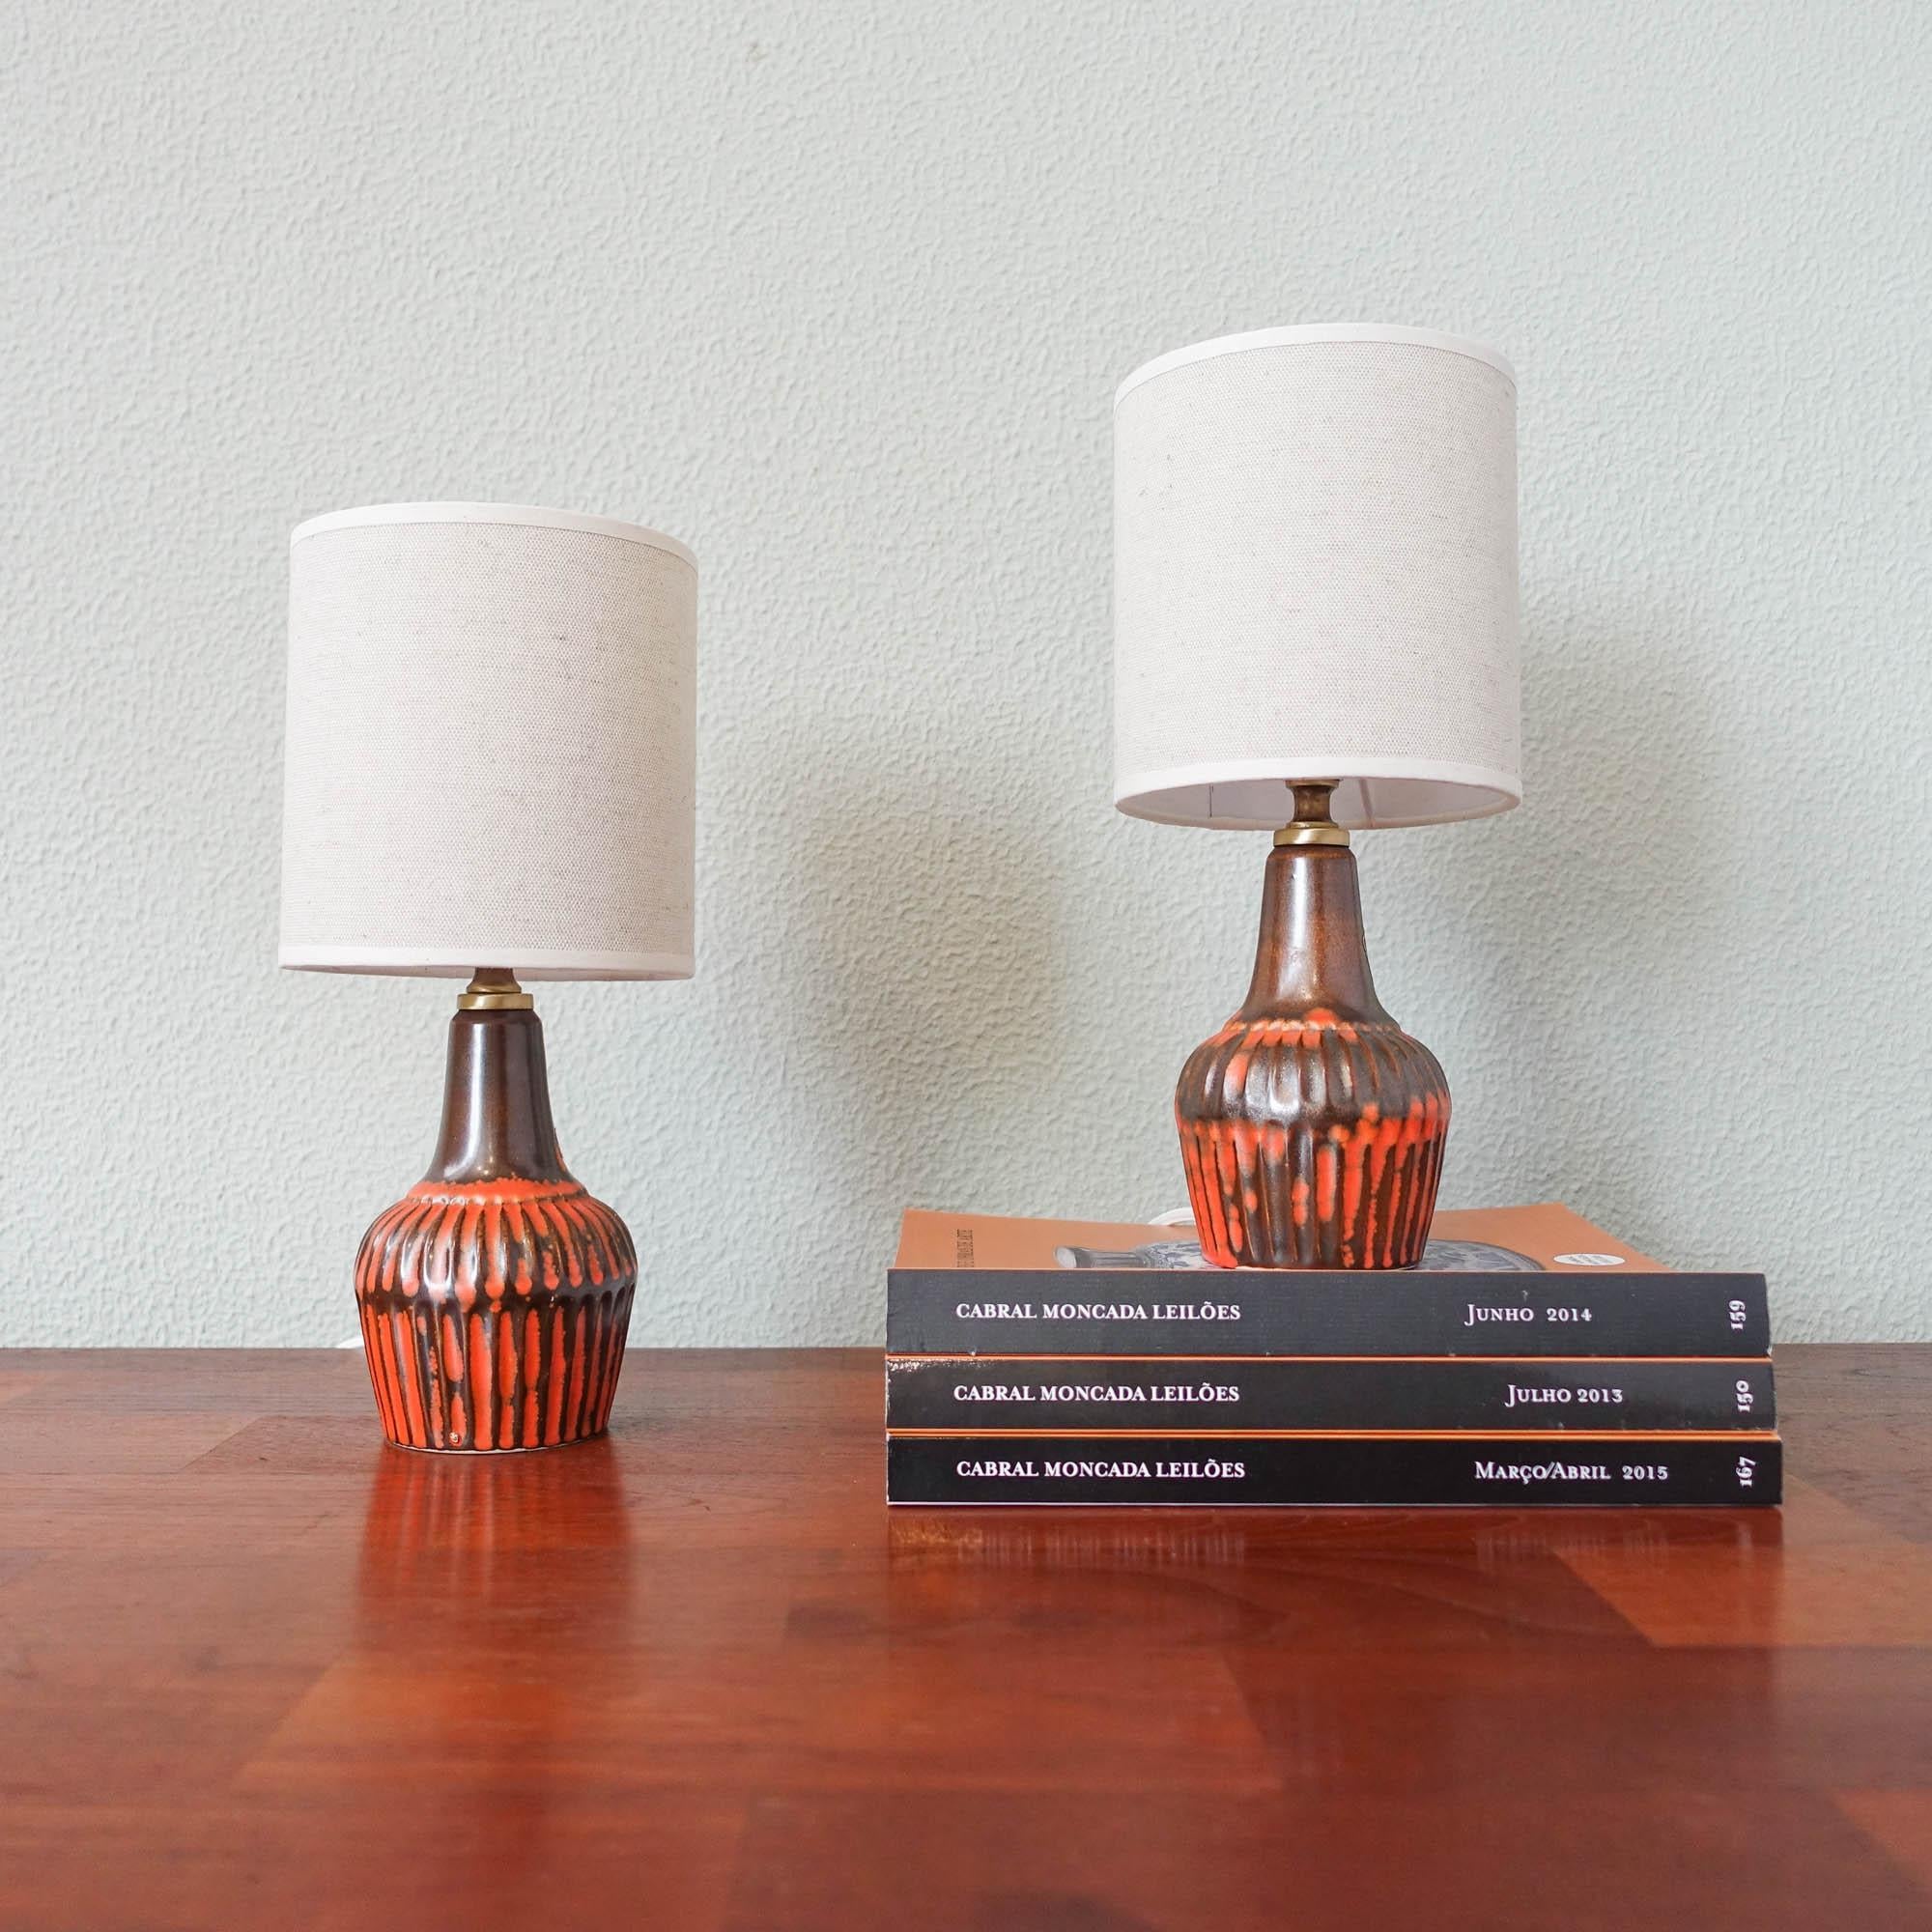 This pair of table lamps were designed and produced by Secla, inn Portugal, during the 1960s. The base is in ceramic with orange and brown tones, resembling the fat-lava technique. The ceramic base is in original and overall in good vintage